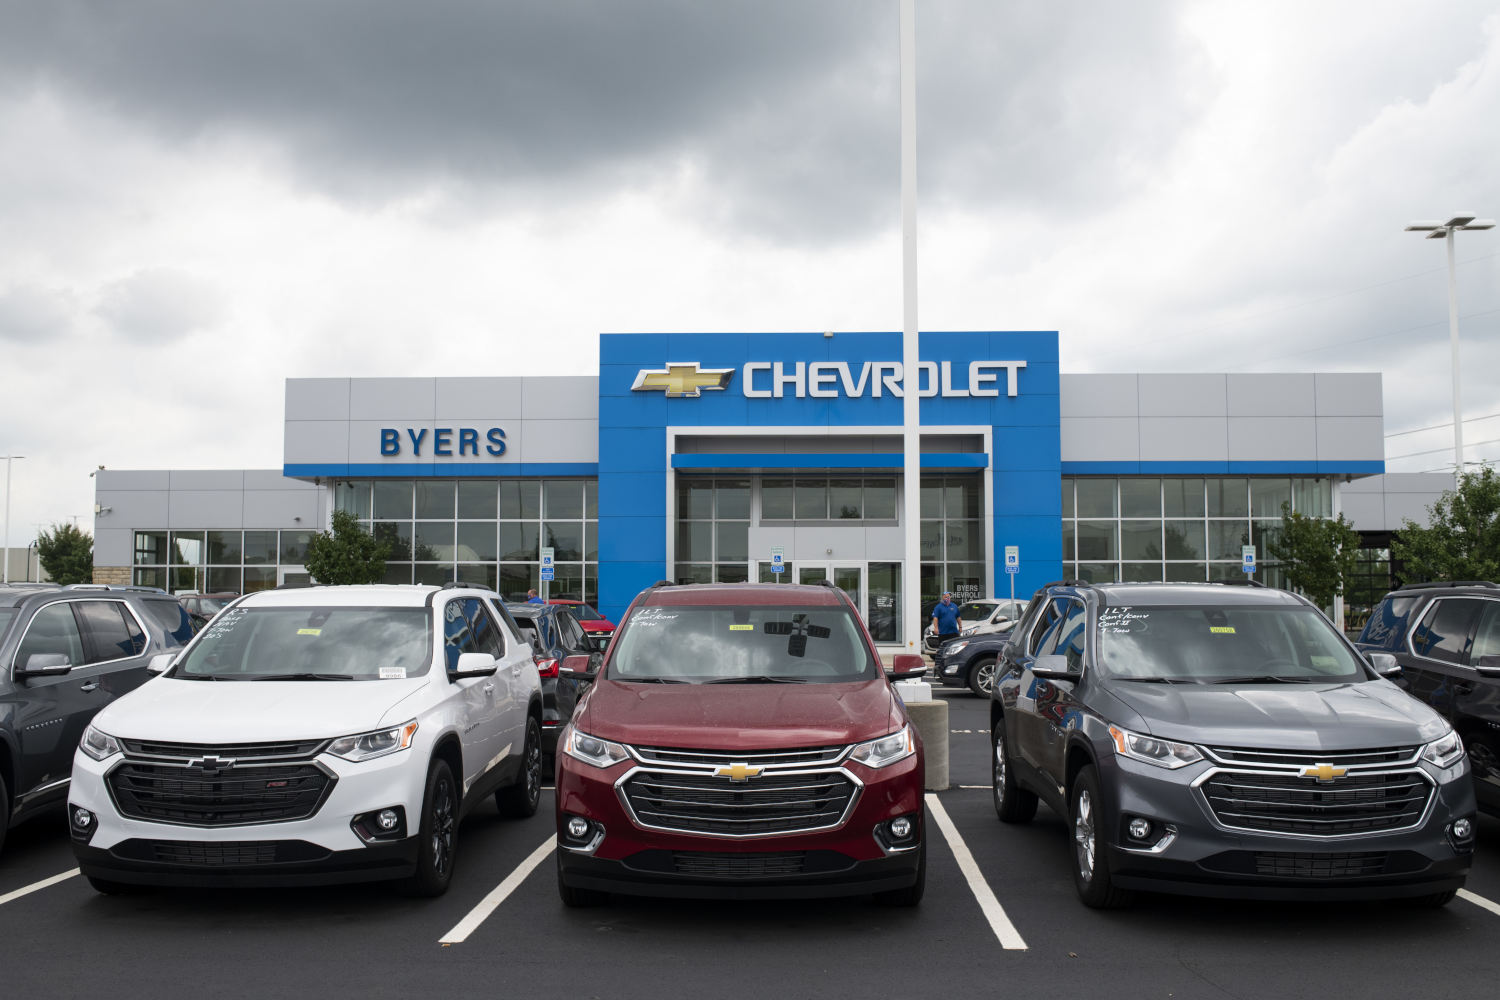 Cheap used cars are more prevalent in Ohio, along with used trucks and SUVs